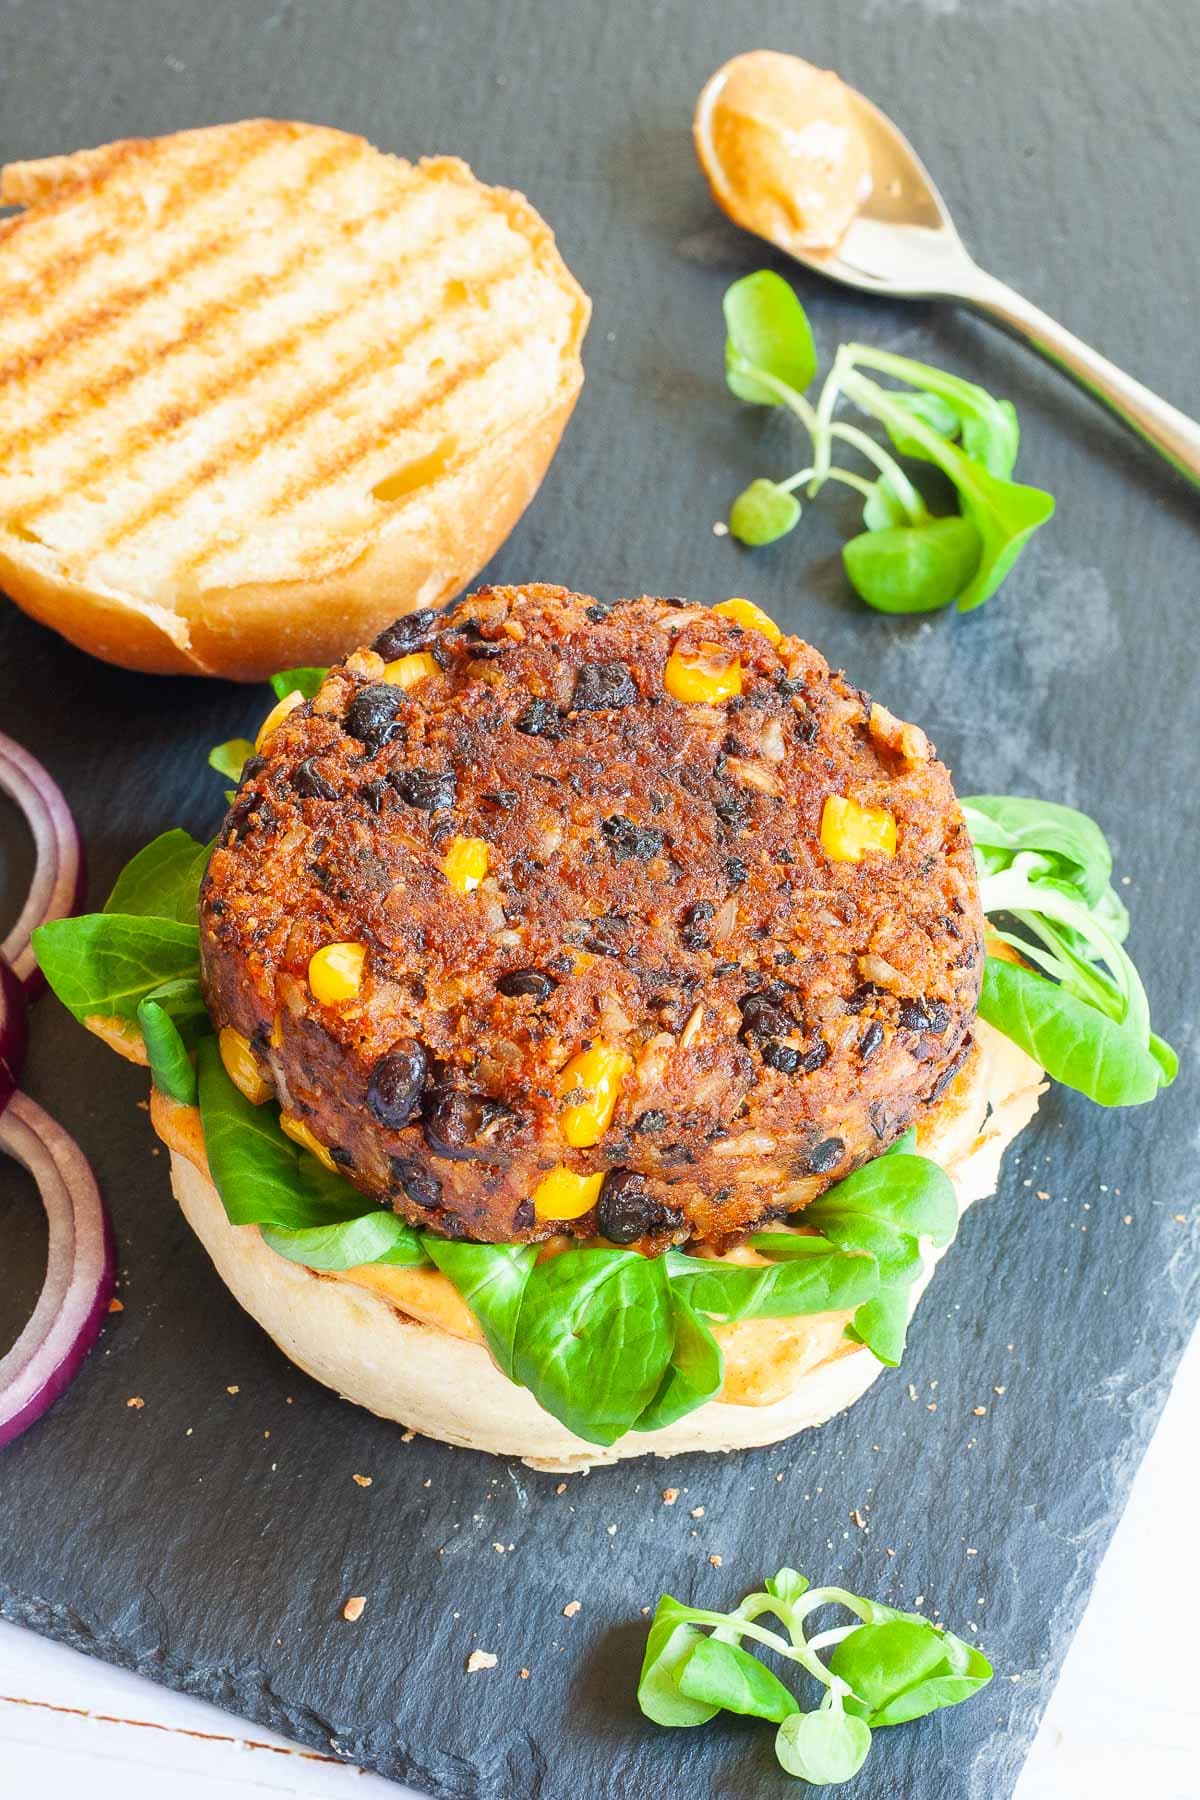 A burger bun with yellow sauce and green leaves is topped with a thick brown burger patty with visible sweet corn and black bean pieces. The top bun is next to it.